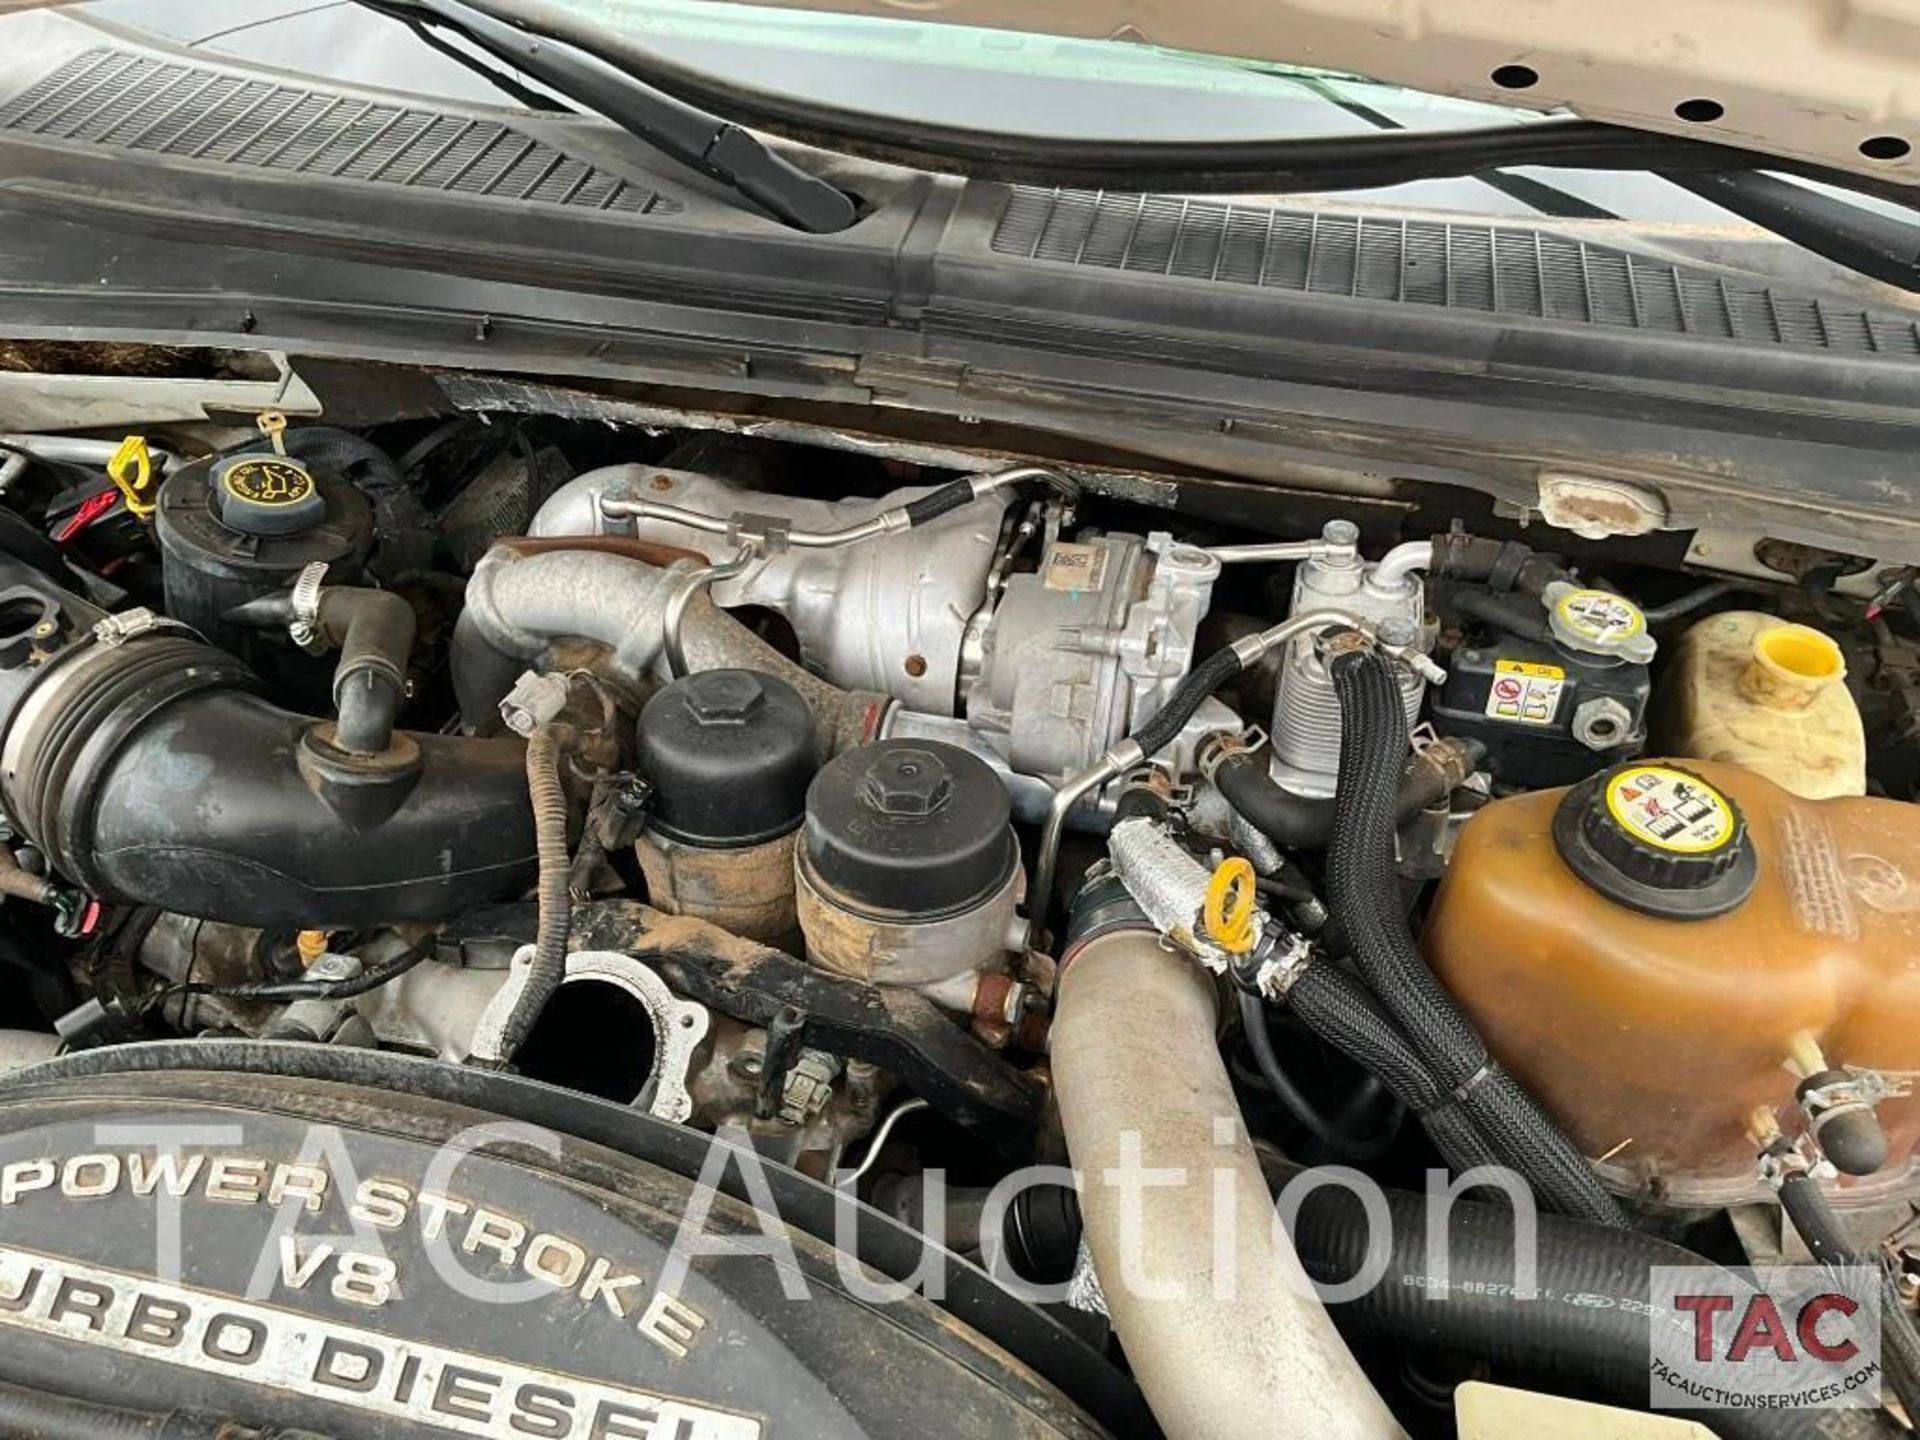 2008 Ford F-350 Super Duty Service Truck - Image 86 of 124